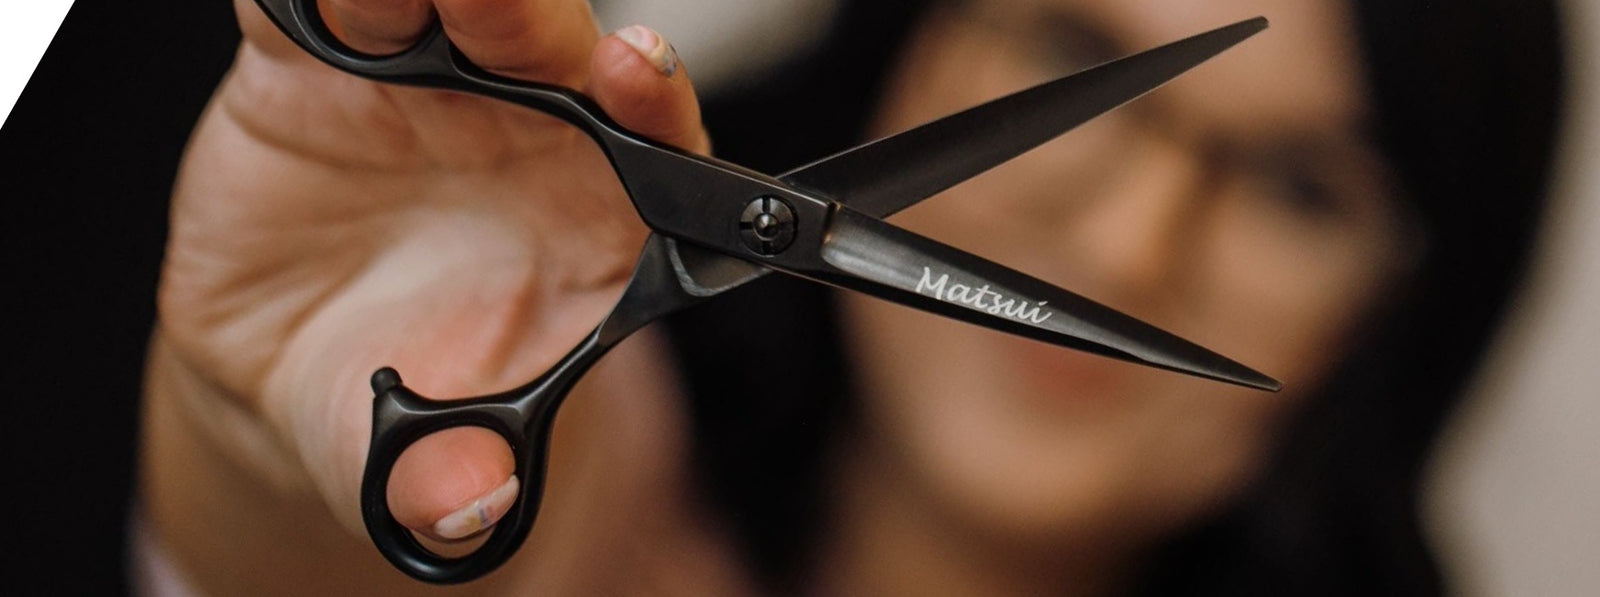 Why Are Hair Scissors Used Instead Of Normal Scissors - Scissor Tech New  Zealand